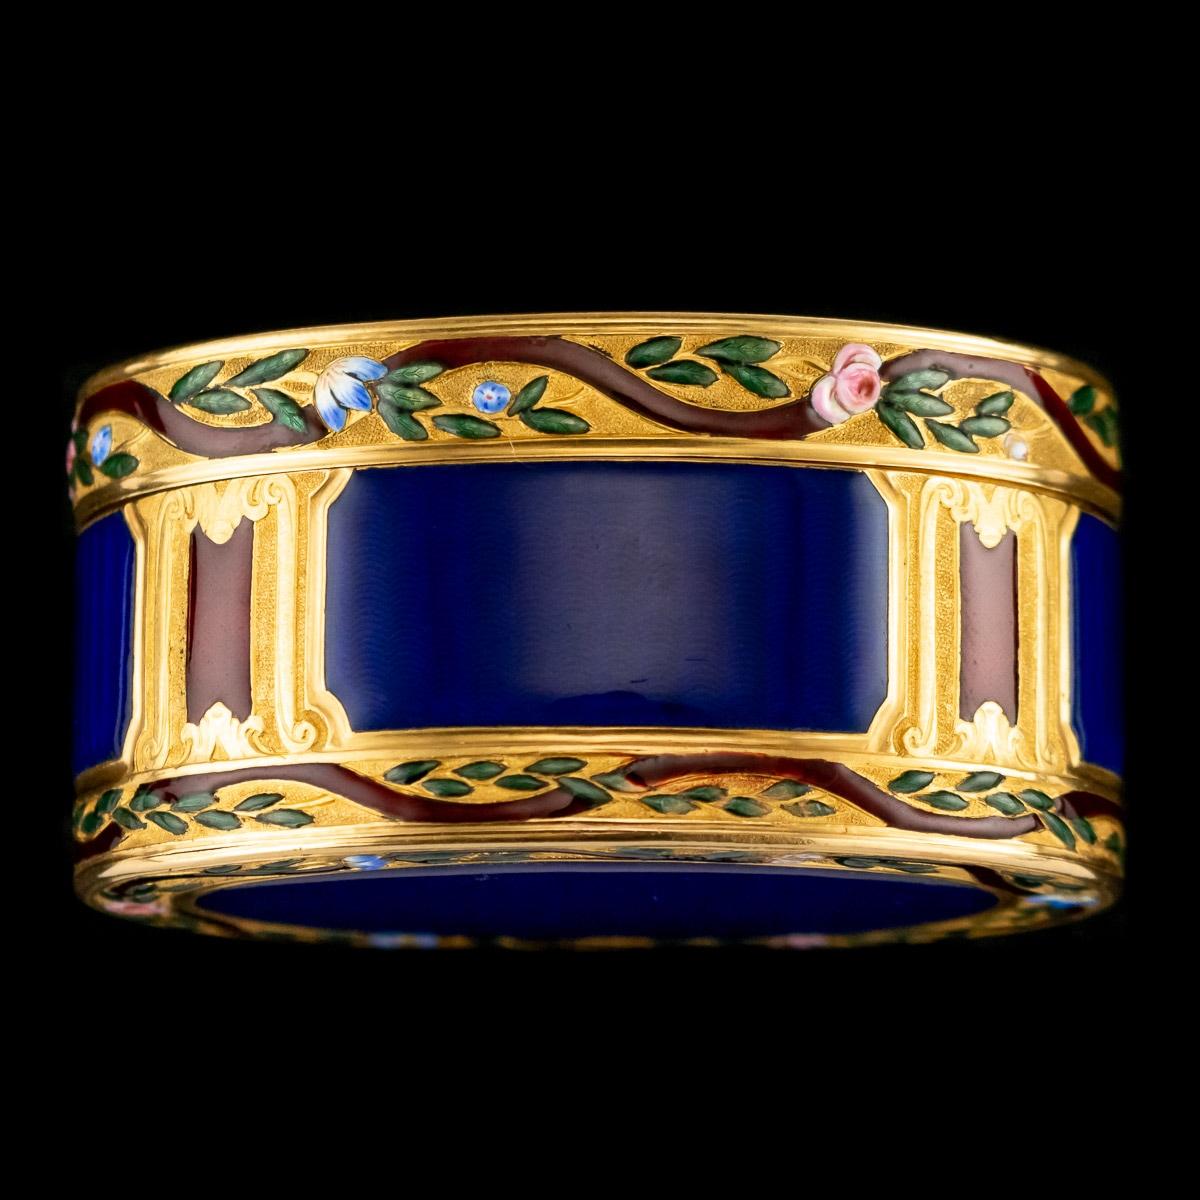 Antique French 18-Karat Gold and Hand Painted Enamel Snuff Box, circa 1770 1